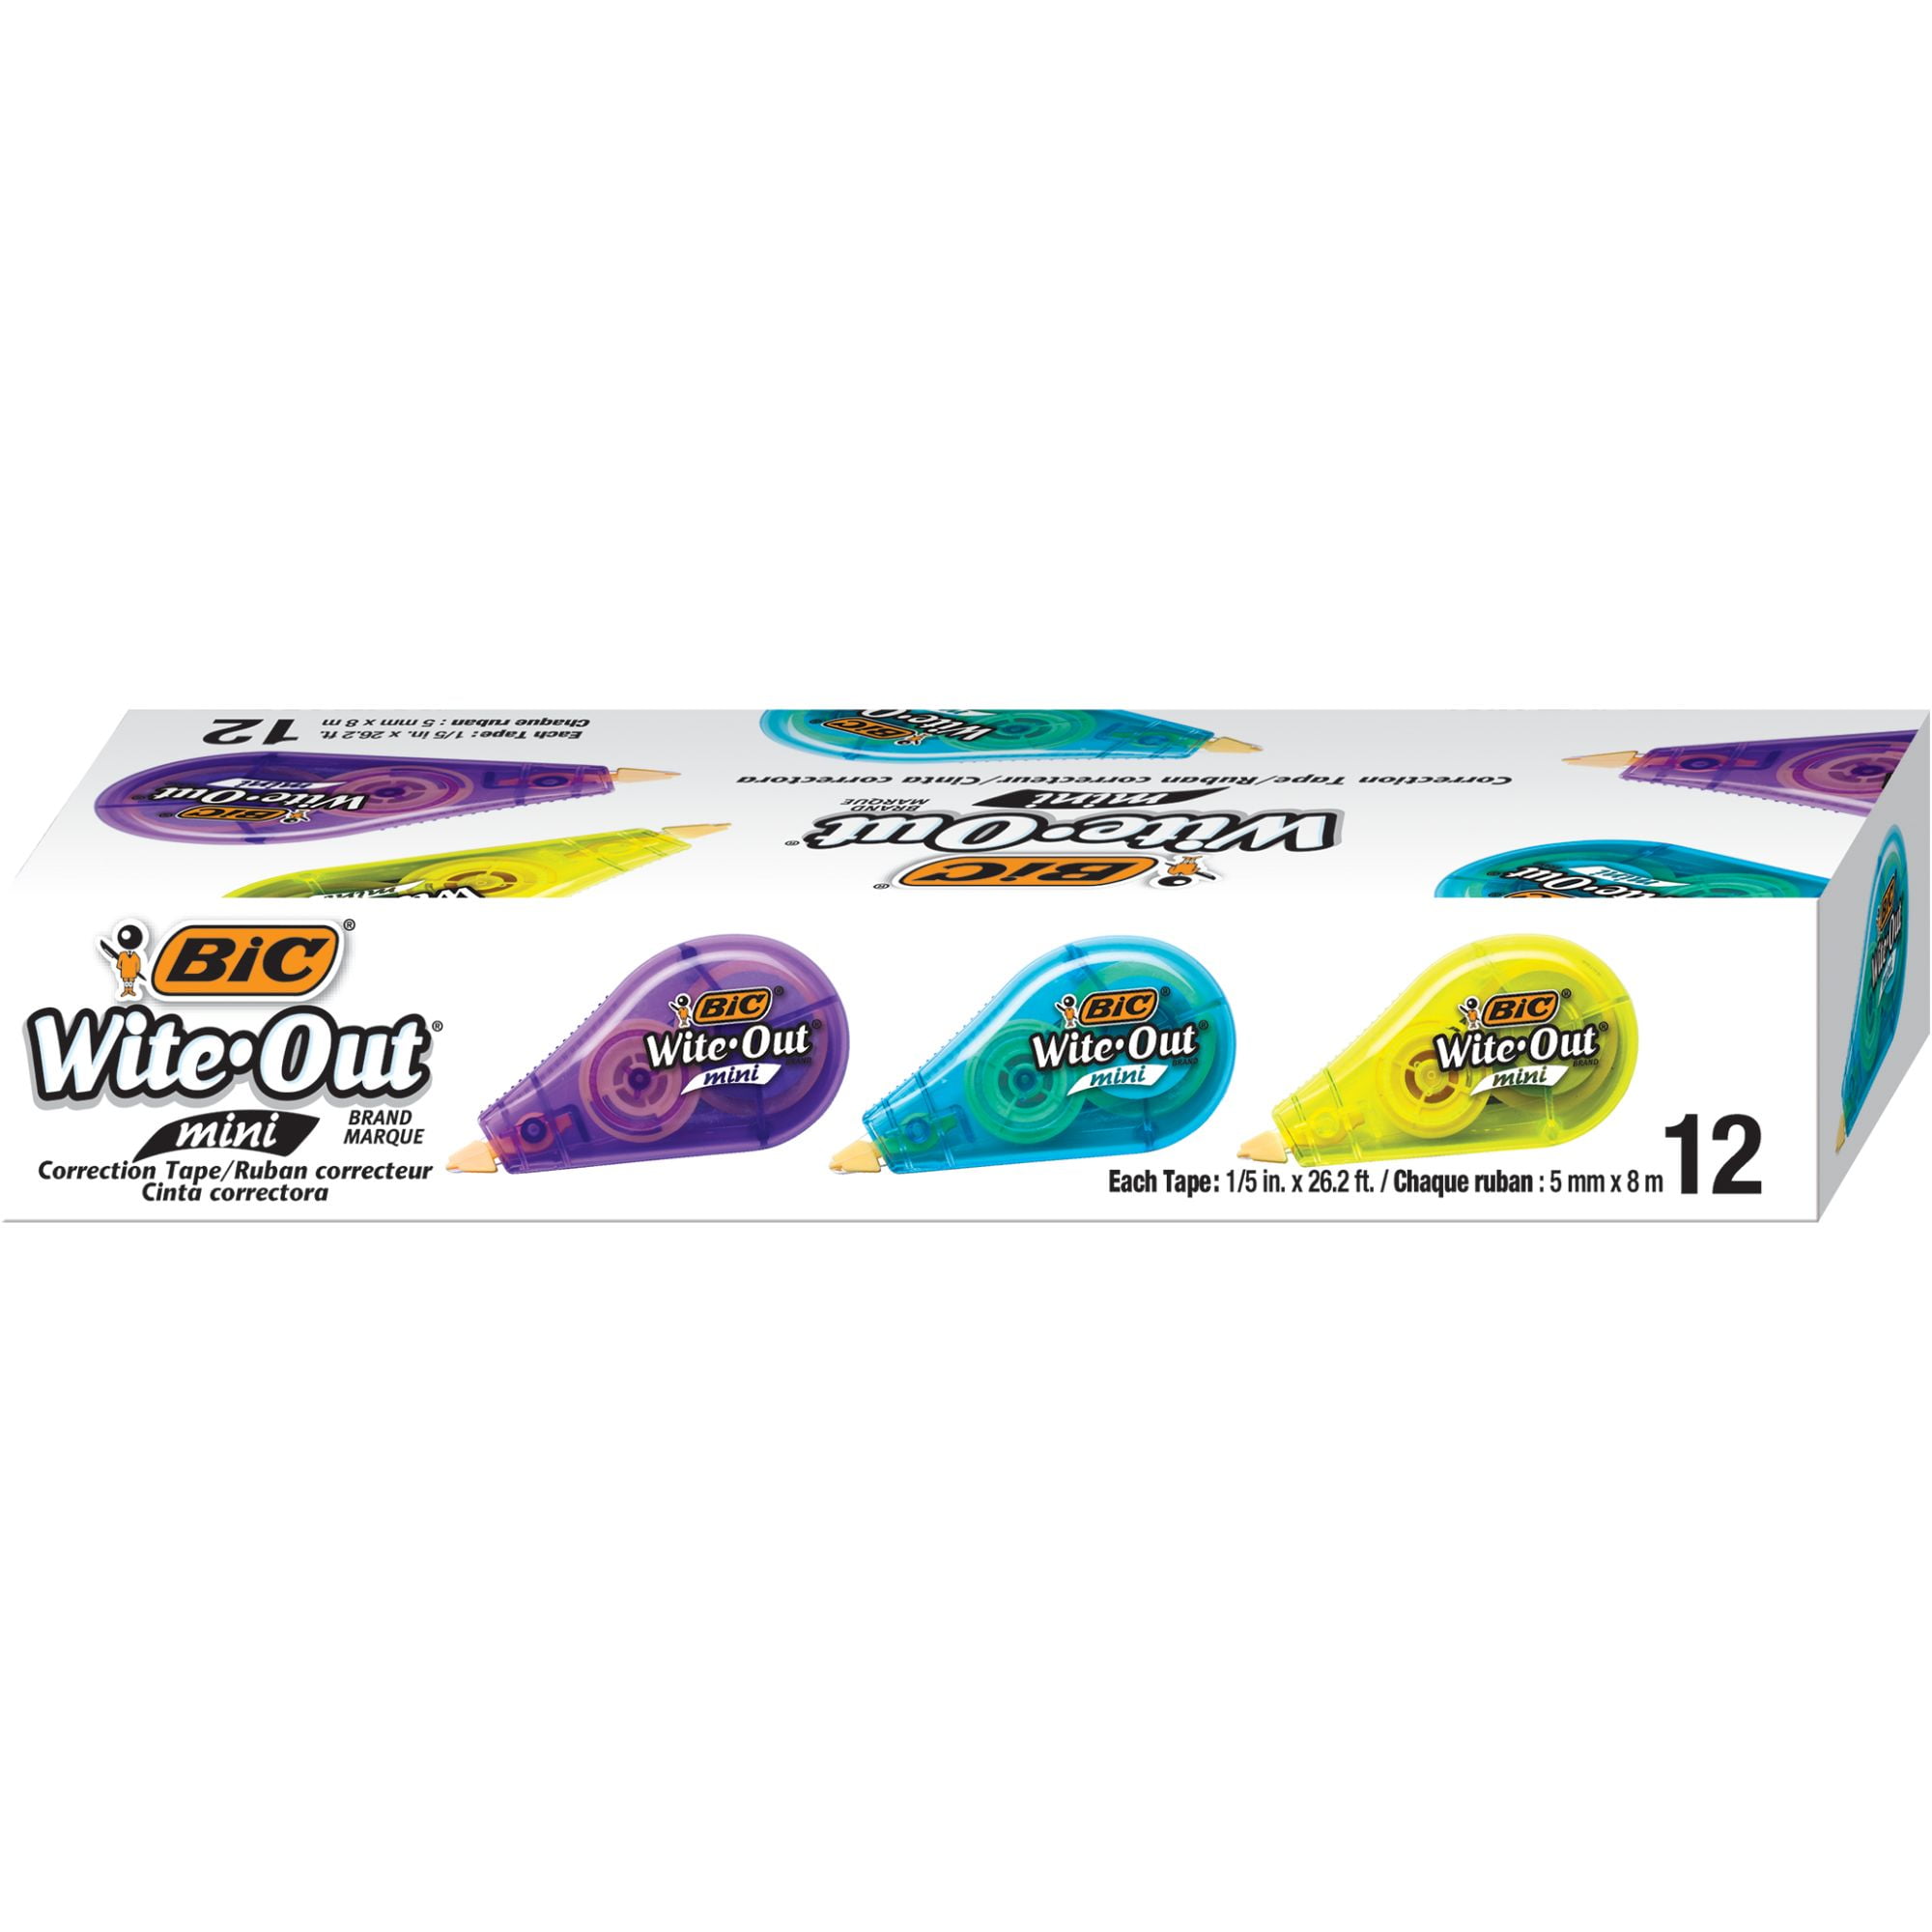  BICWOETP11  BIC Wite-Out Brand ECOlutions Mini